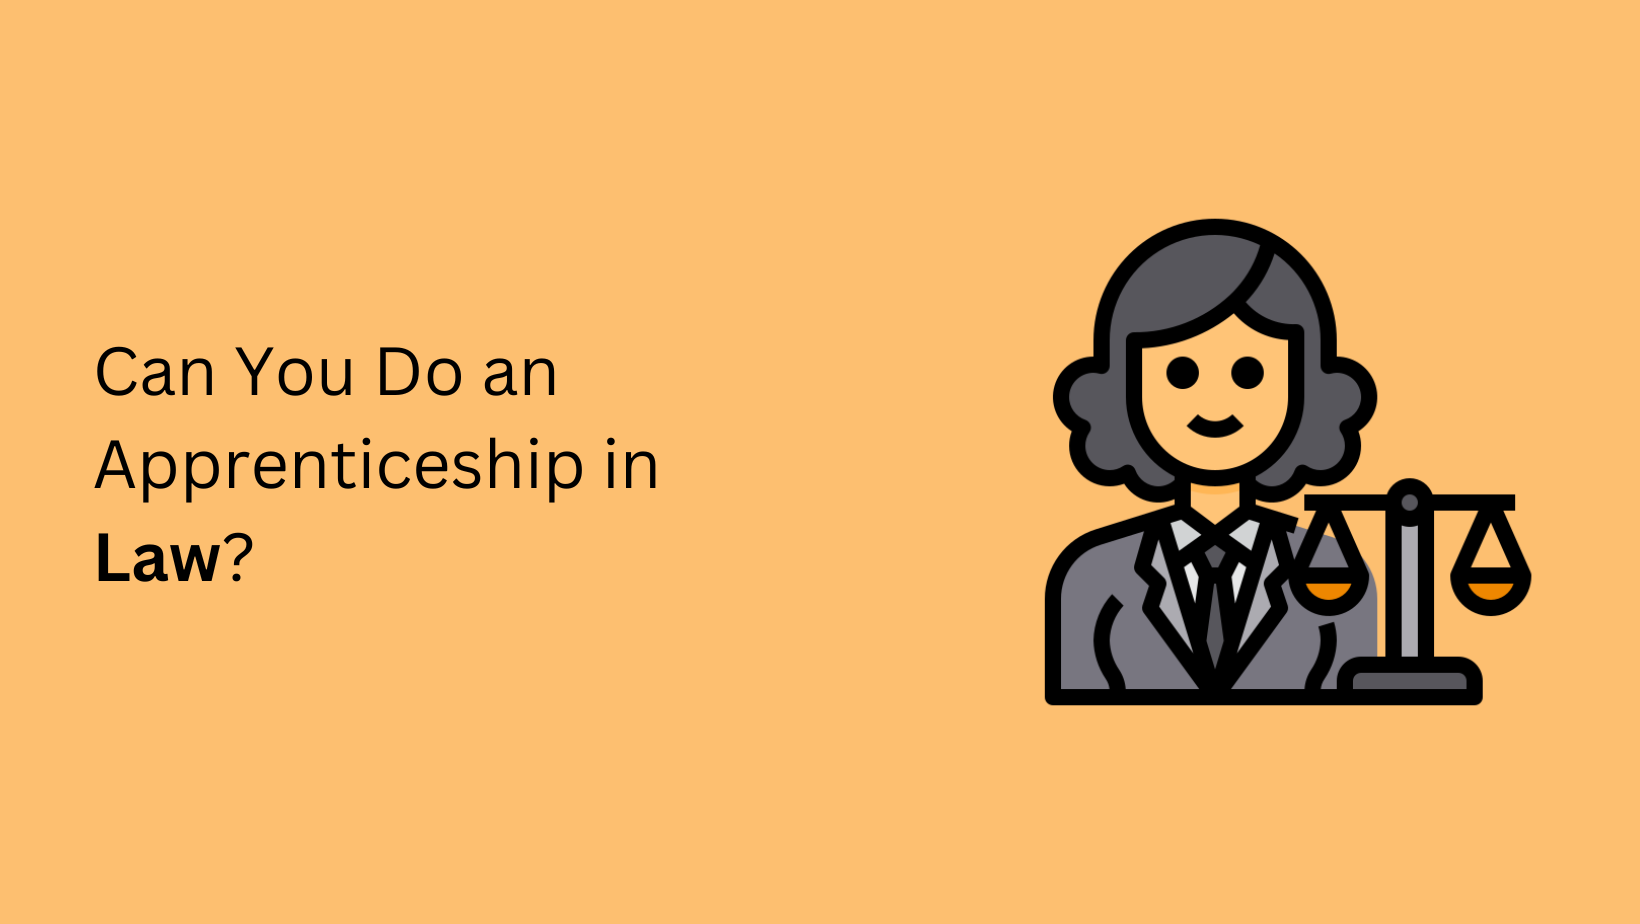 Can You Do an Apprenticeship in Law